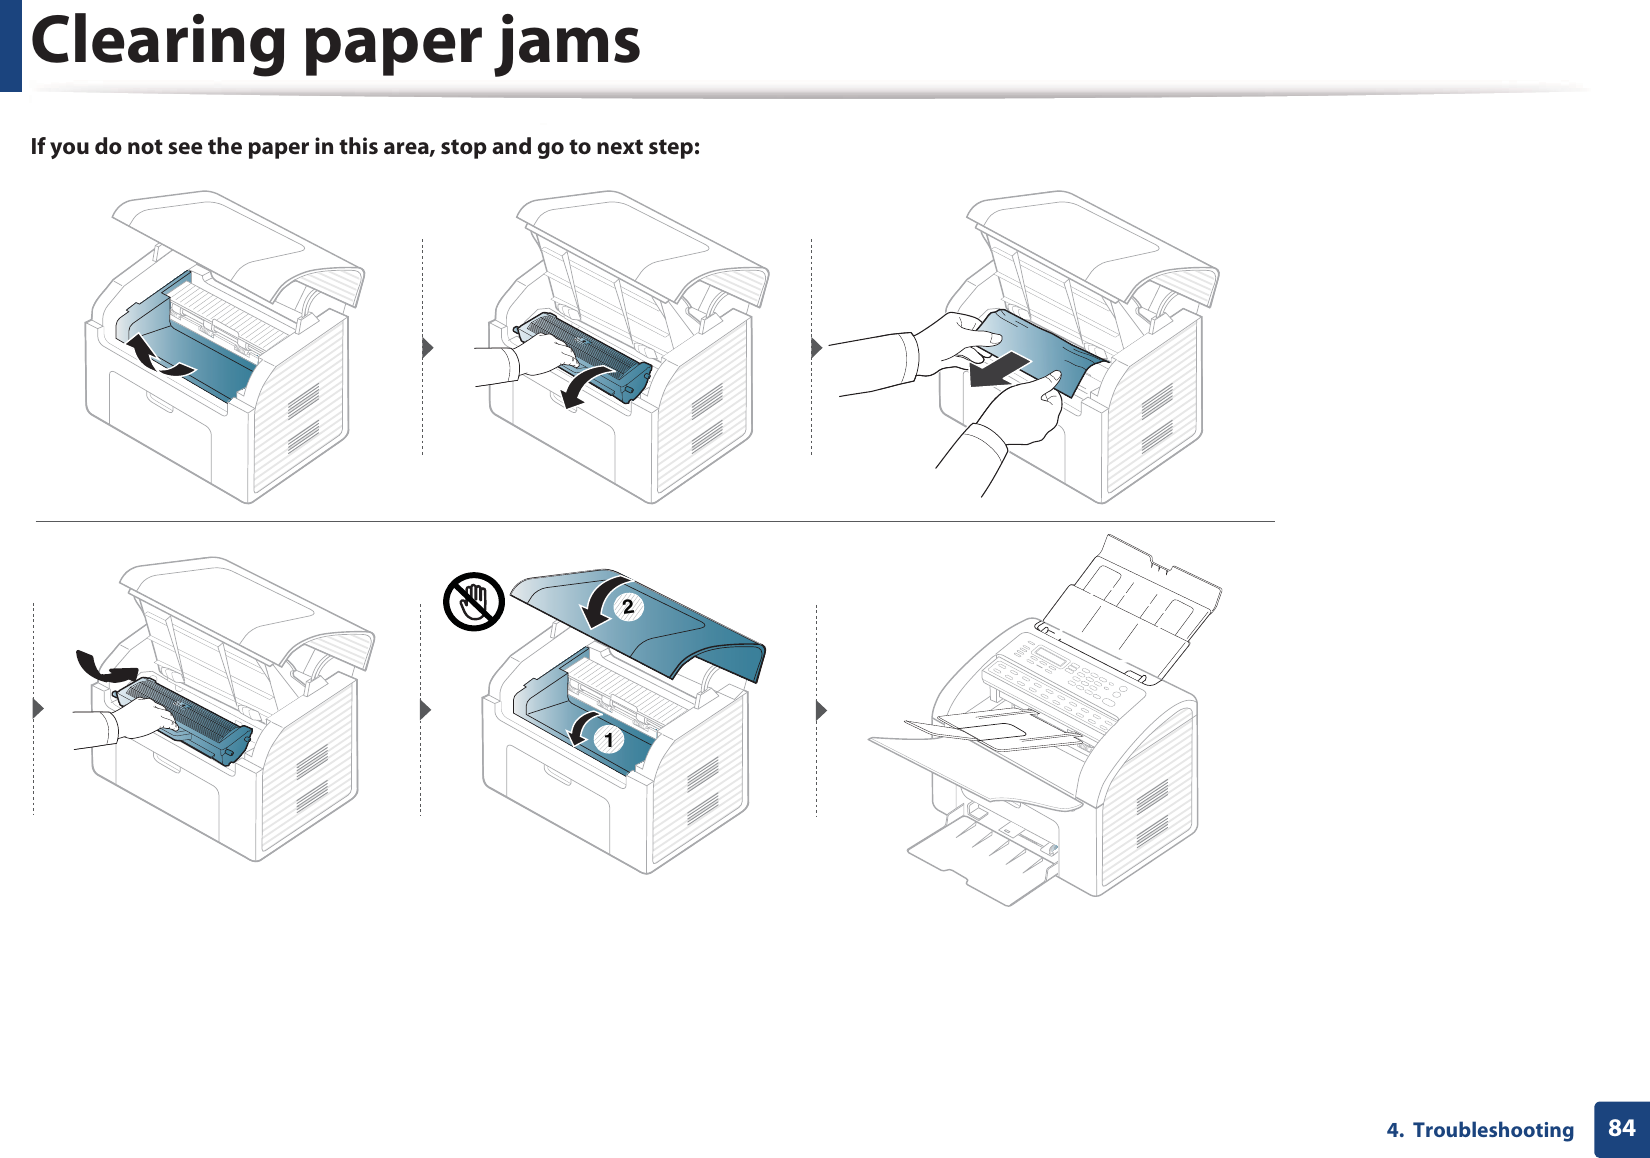 Clearing paper jams844.  TroubleshootingIf you do not see the paper in this area, stop and go to next step:1 2